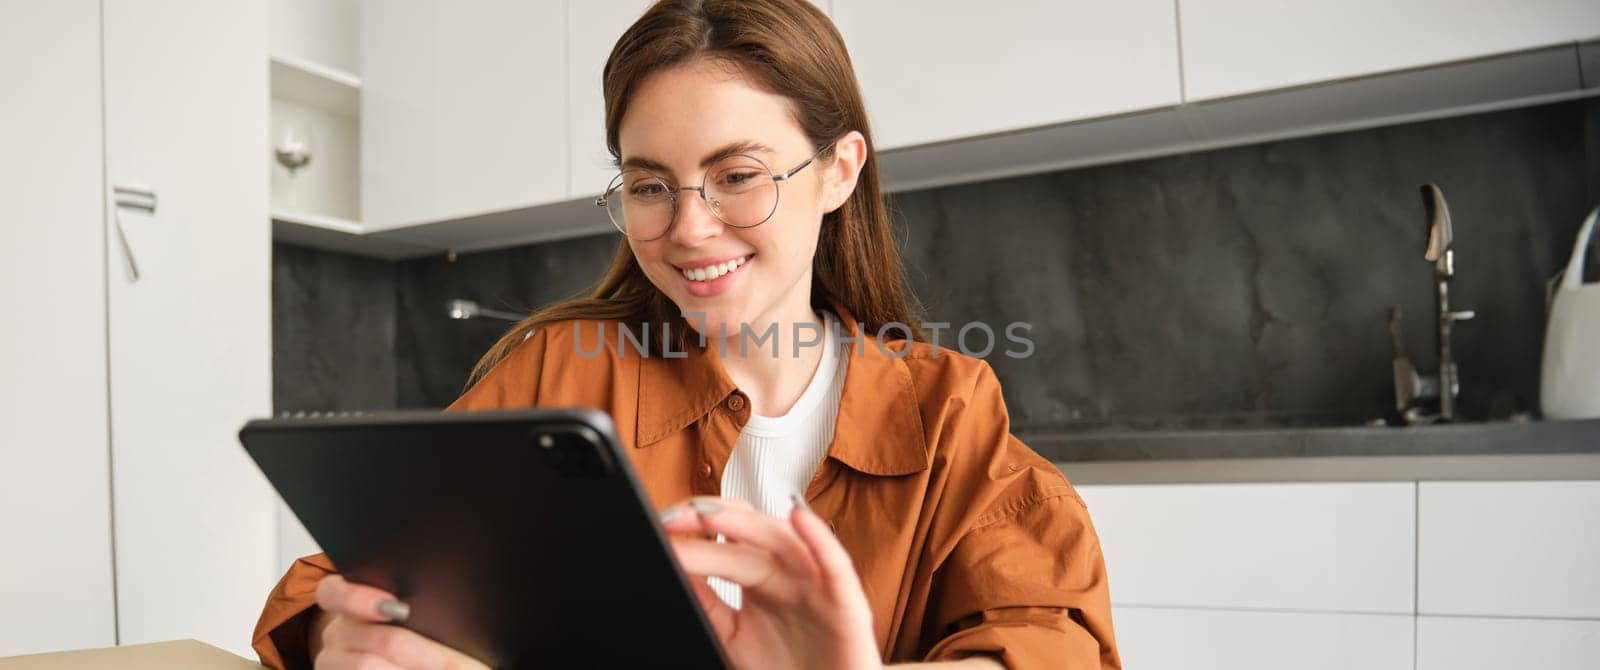 Portrait of young woman in glasses, beautiful girl student reading on digital tablet, messaging, doing online shopping while sitting in kitchen.